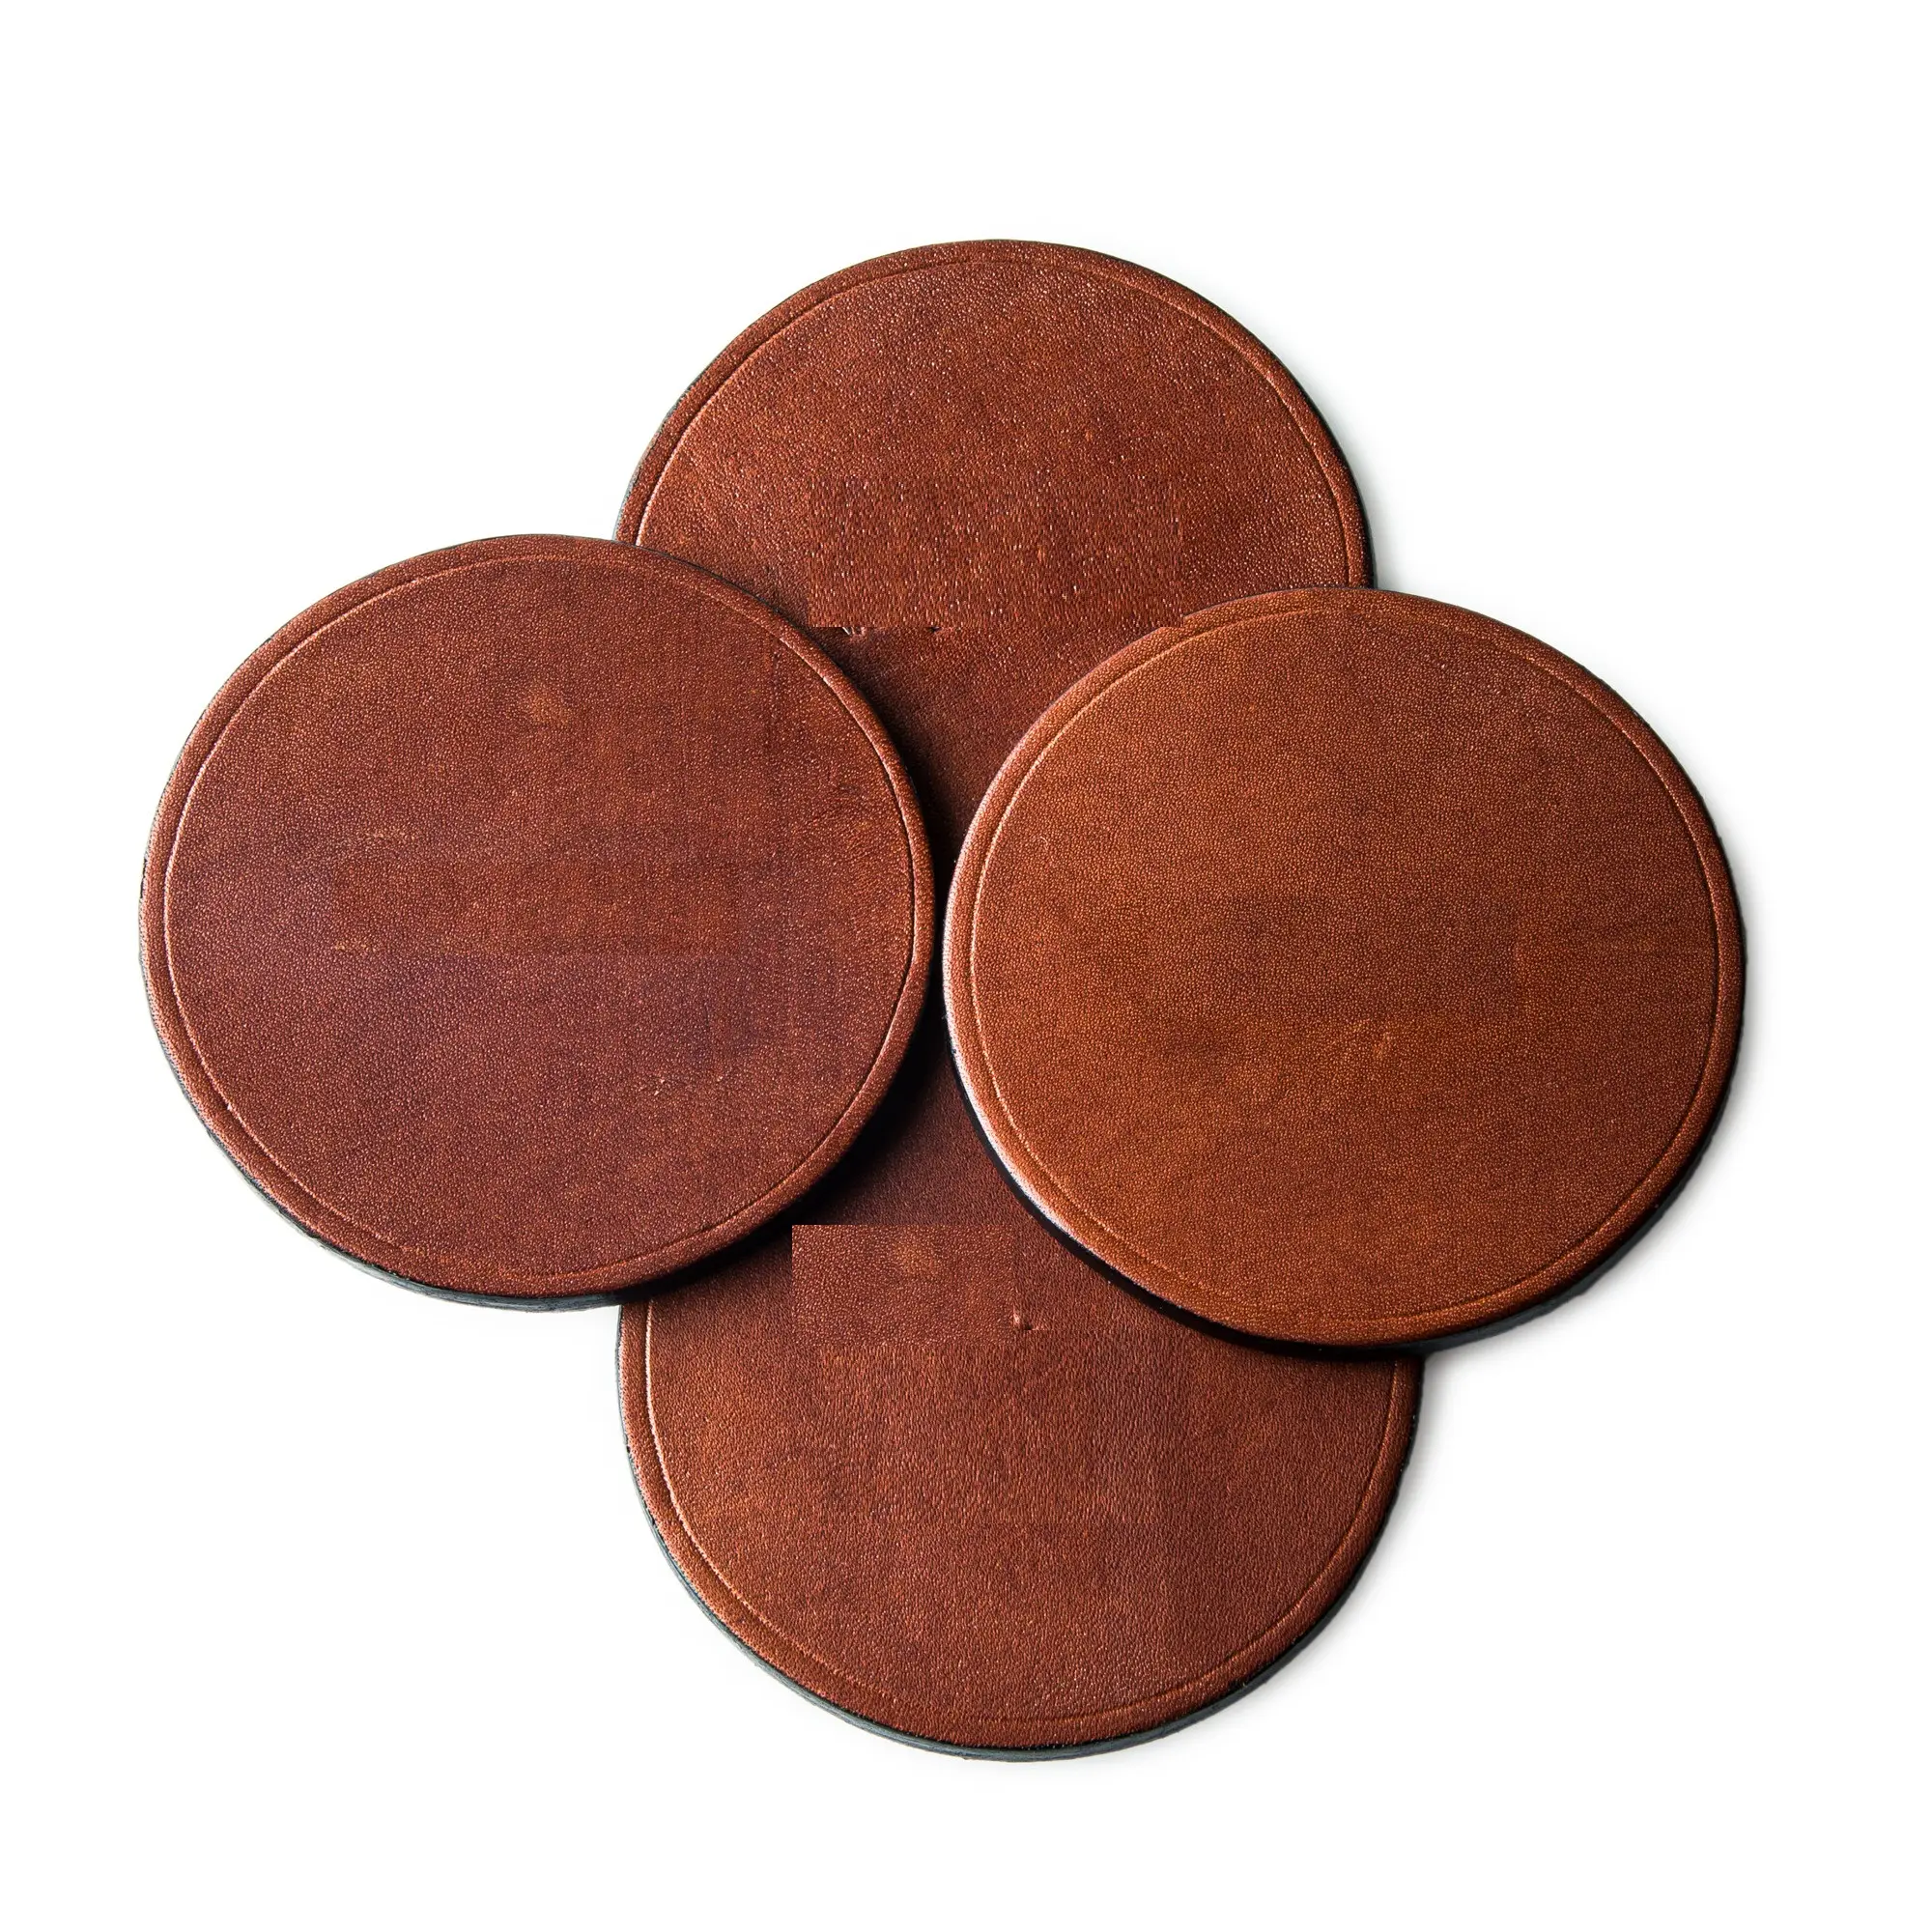 Standard Quality Personalized Custom Waterproof Round PU Leather Absorbent Decorative Coffee Cup Coasters with Cork Base